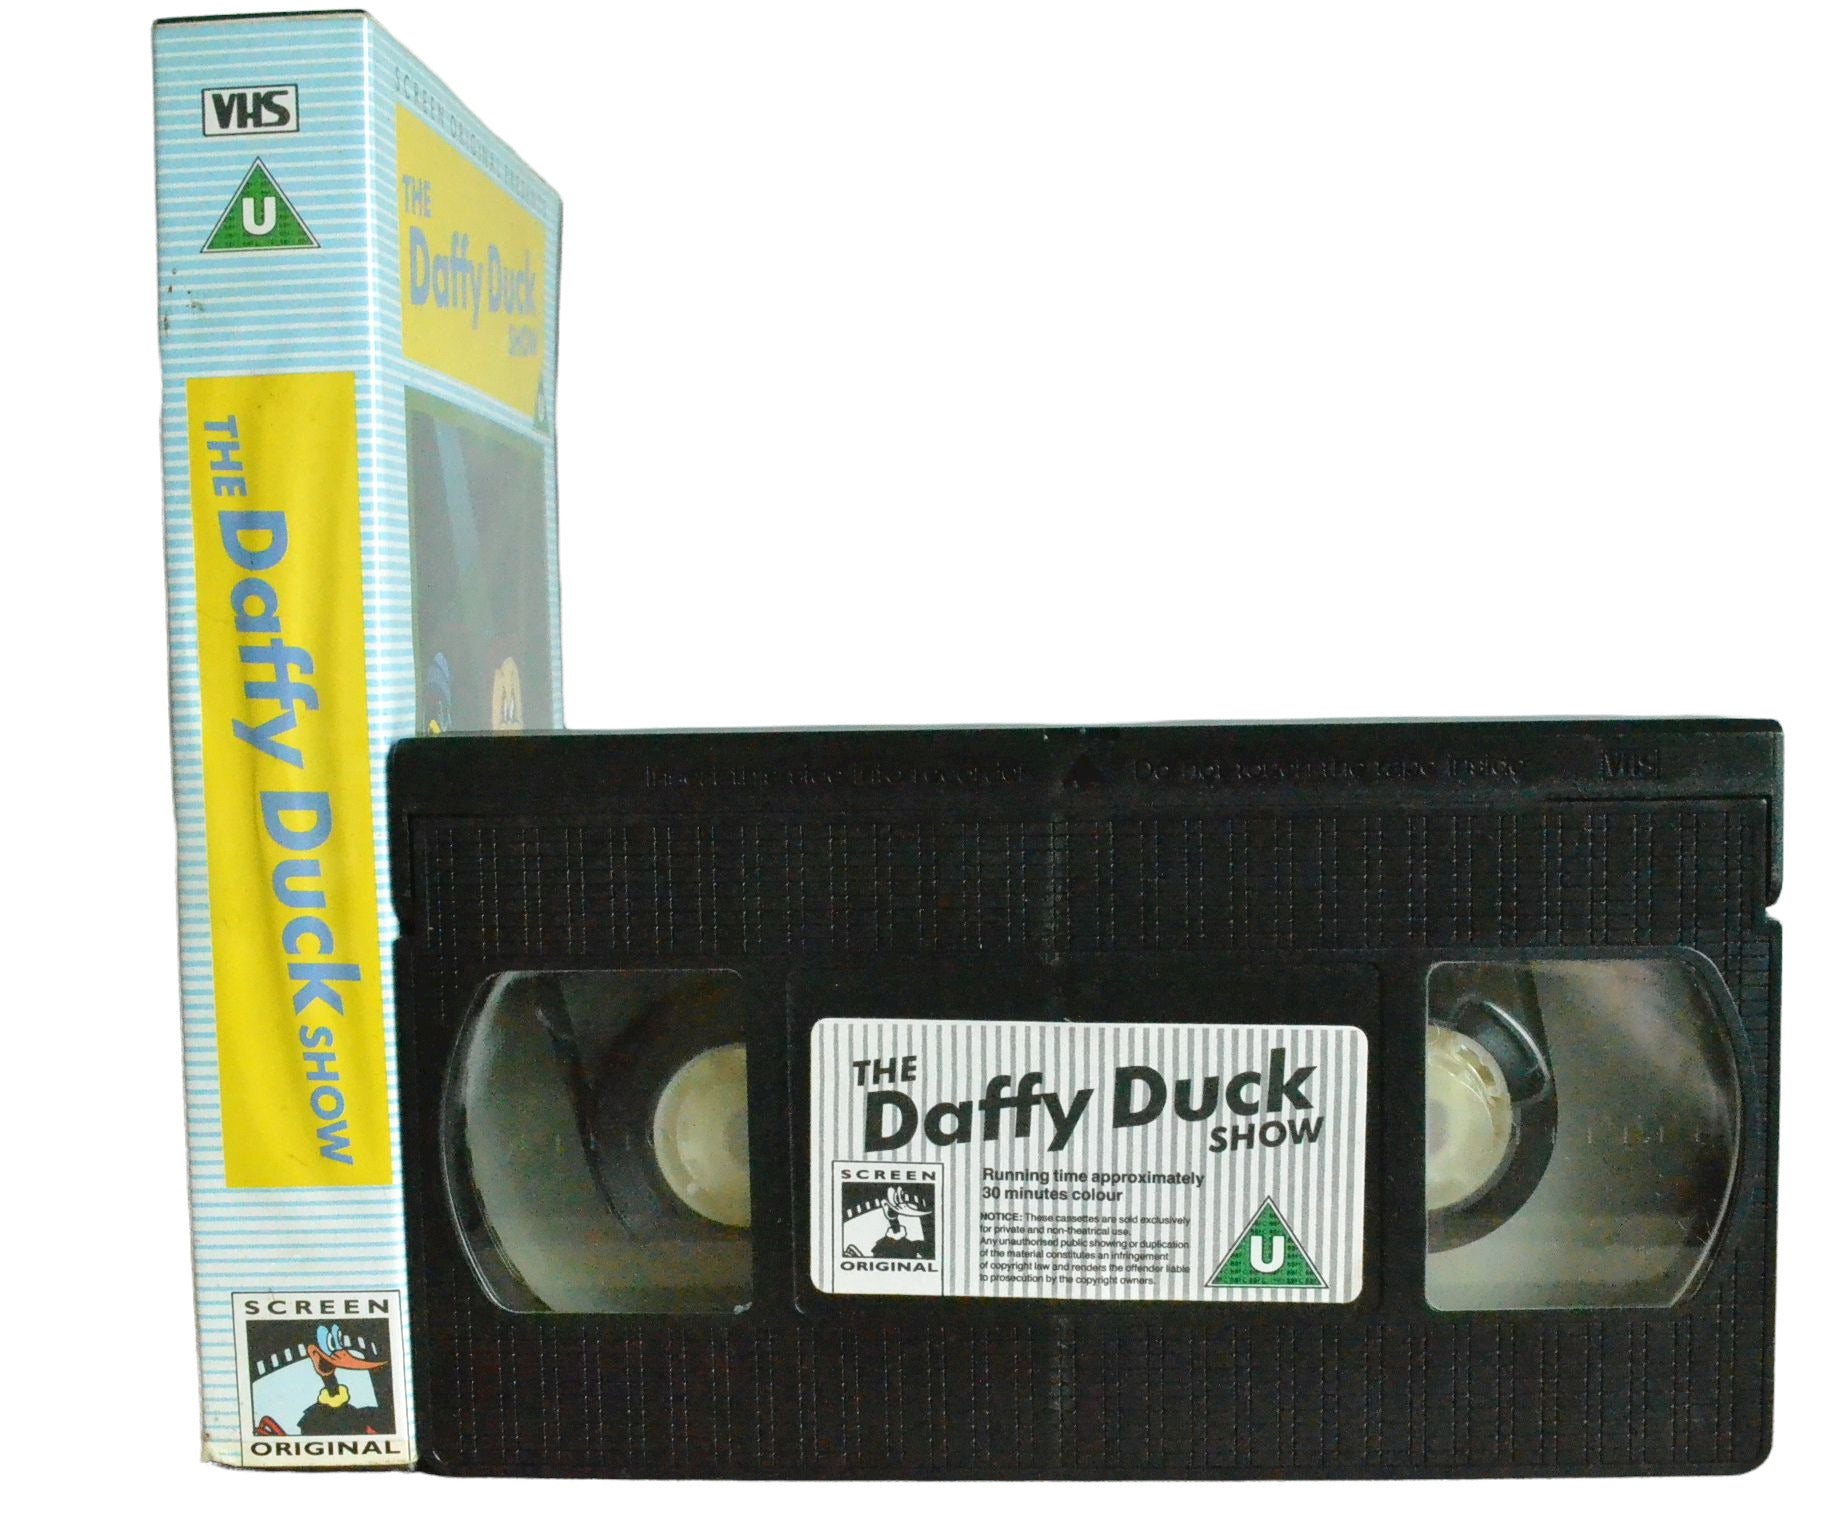 The Daffy Duck Show - Non Stop action-packed Cartoon Fun!!! - Screen Original - Children's - Pal VHS-